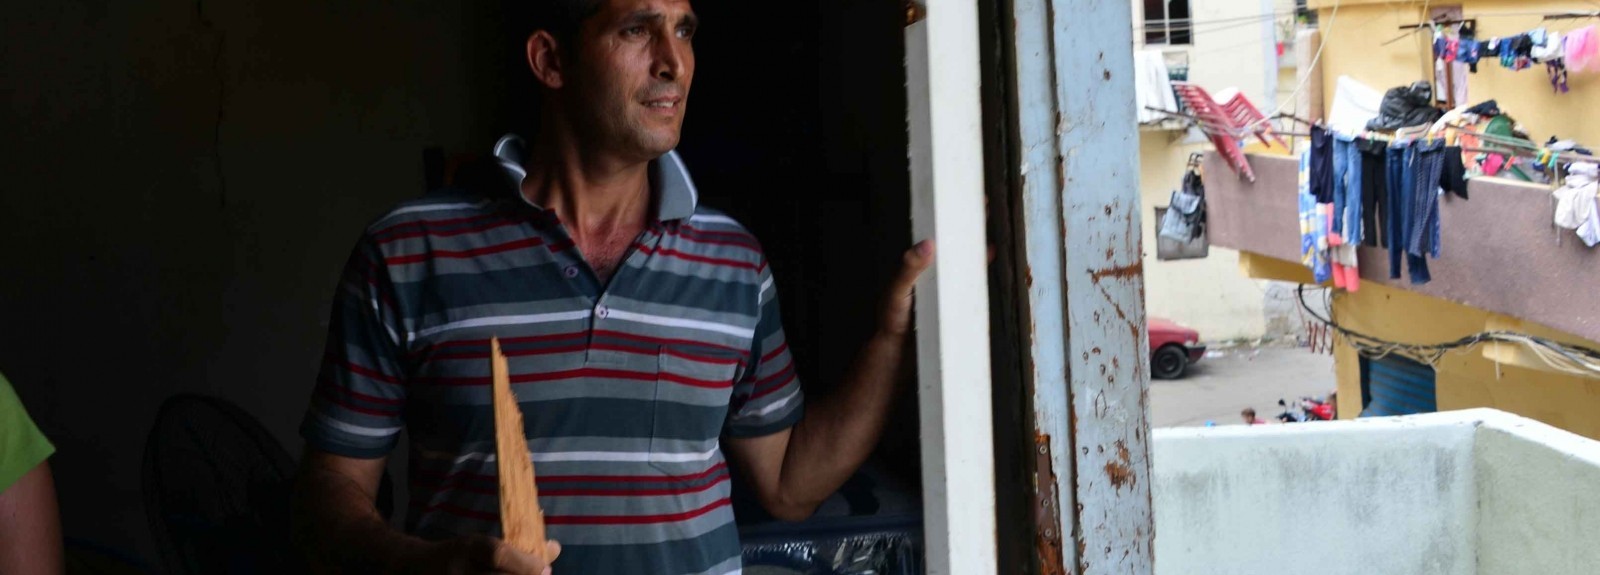 Khayrallah Warde, 40, was on his way home from Tripoli when he heard about the blast. His three children were at home in the family's two-room flat, and told him the doors blew in off their hinges. Unemployed, he says he cannot afford to fix the doors to his family's home. (Photo by Matt Hackworth/Corus International)